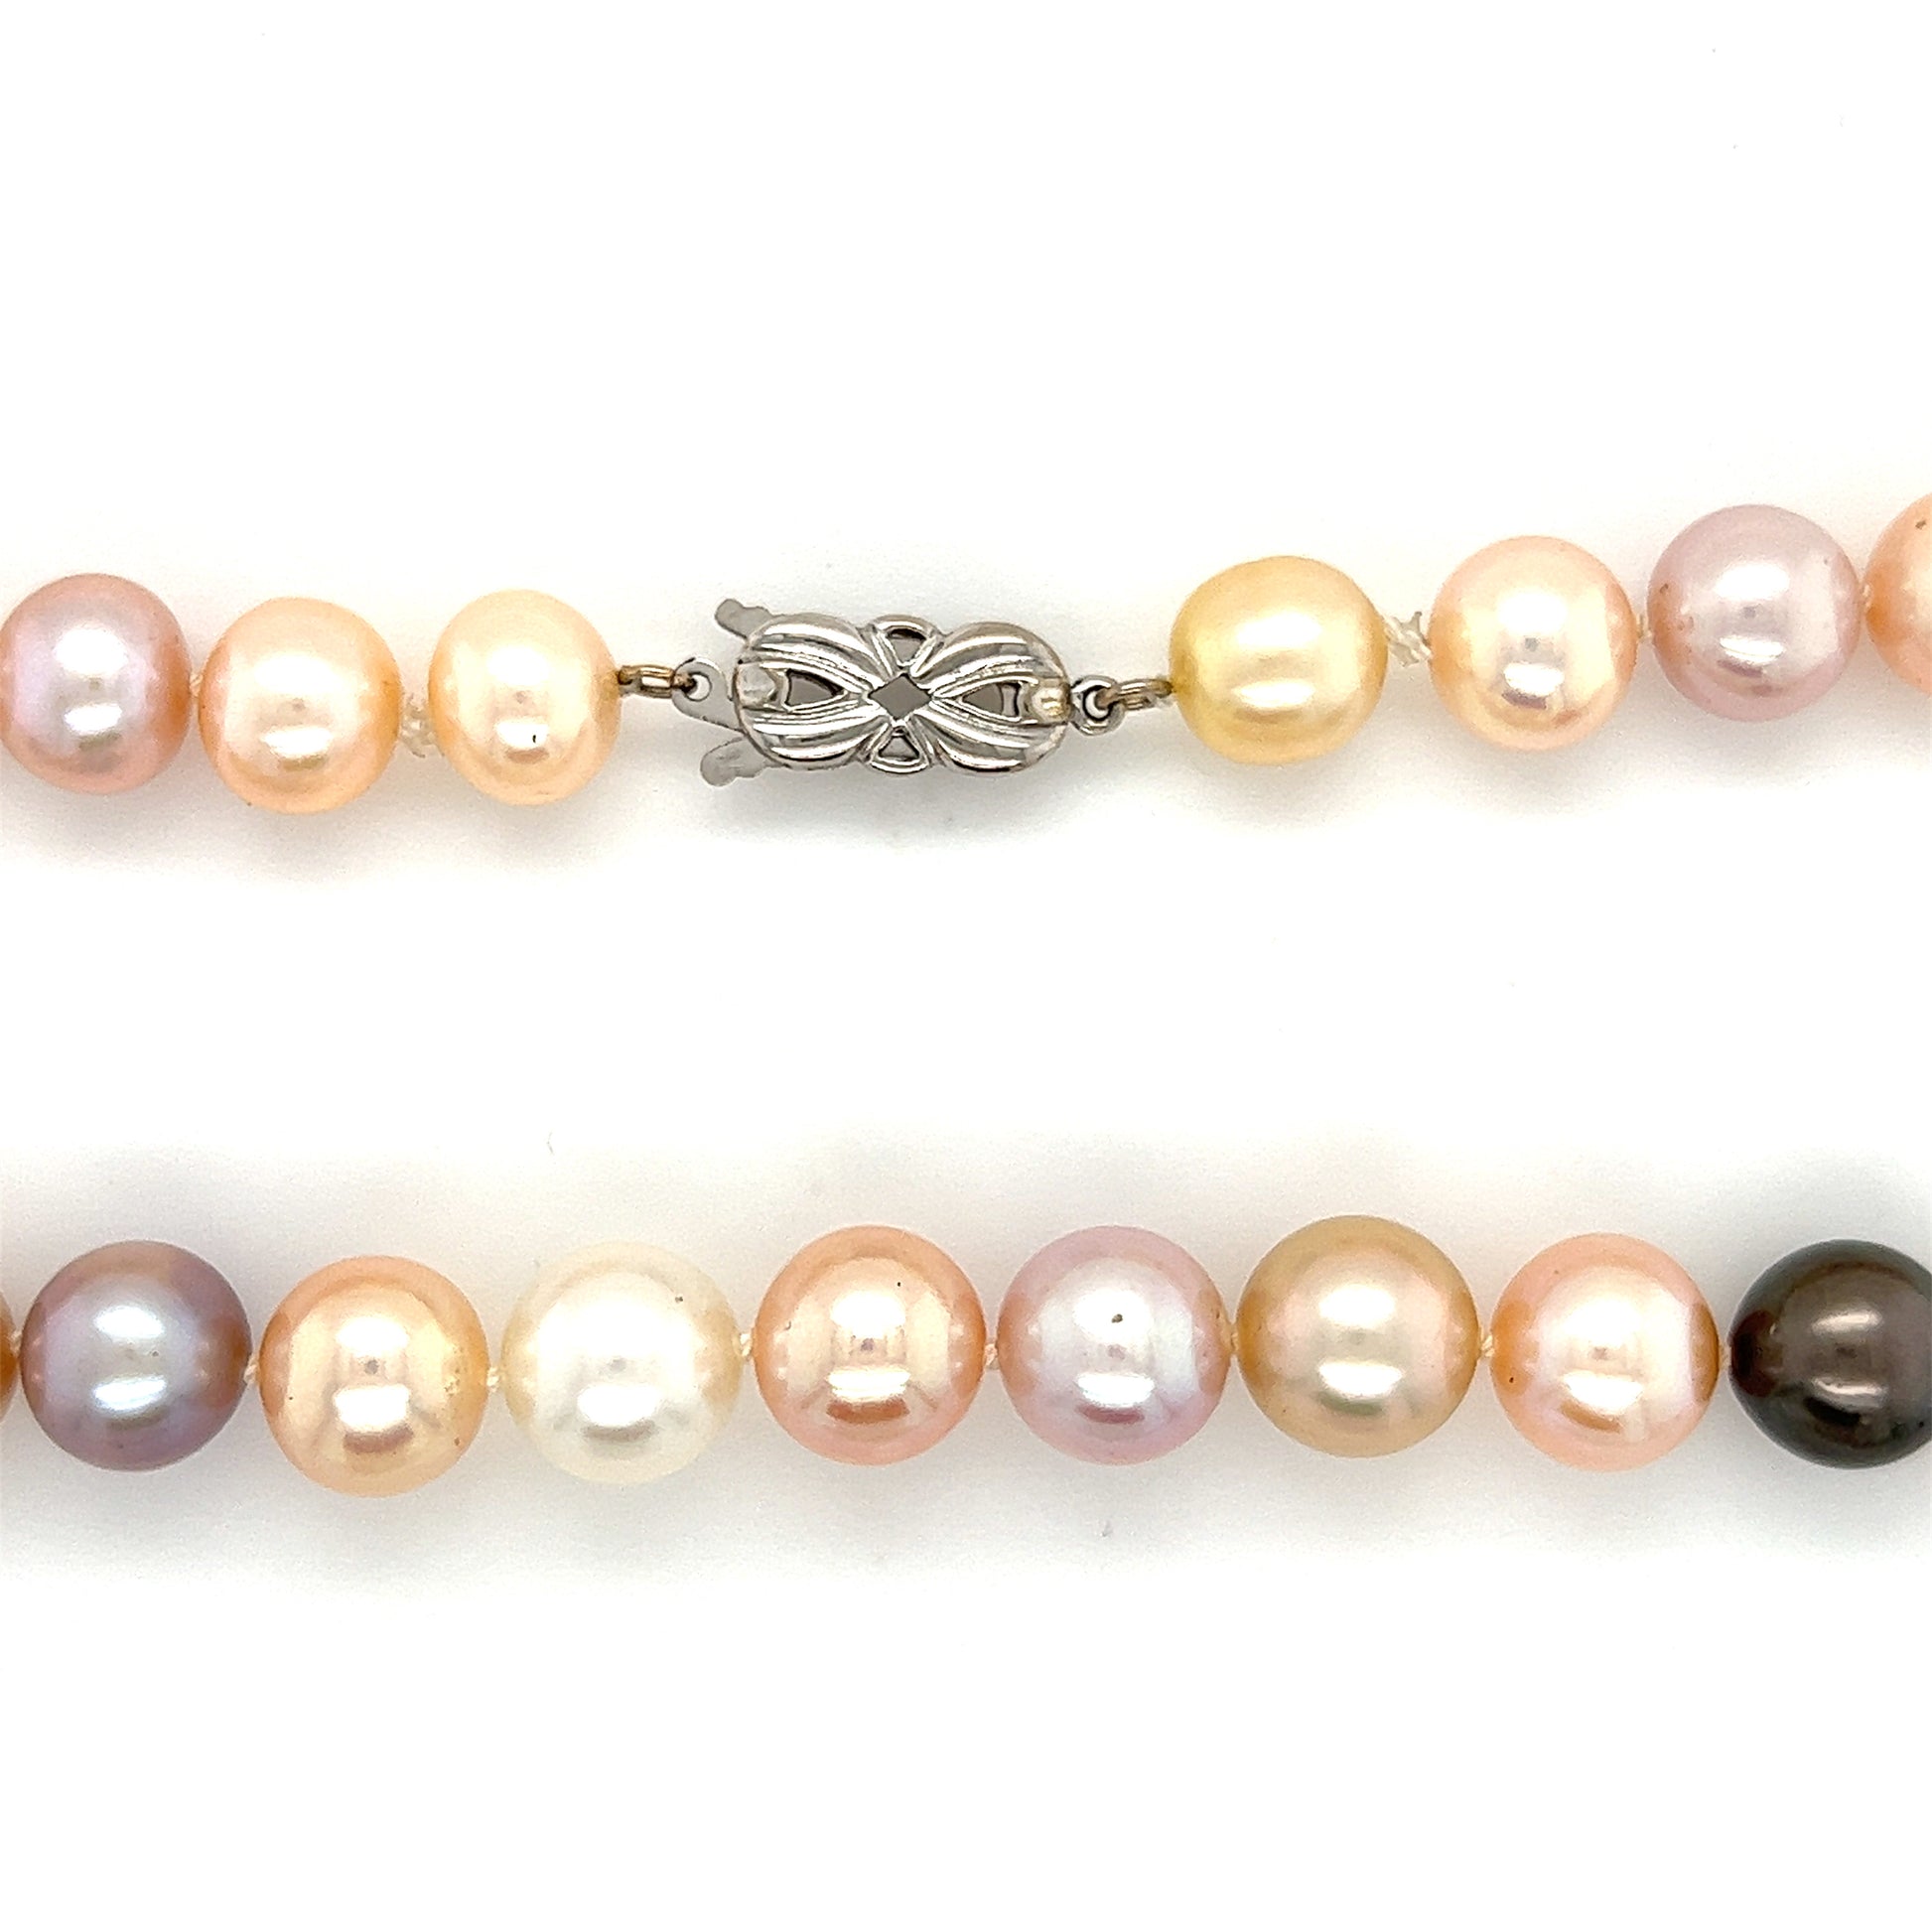 Multicolor Pearl Necklace with Forty-Seven 9.5mm Pearls and 14K White Gold Catch Pearls and Catch View